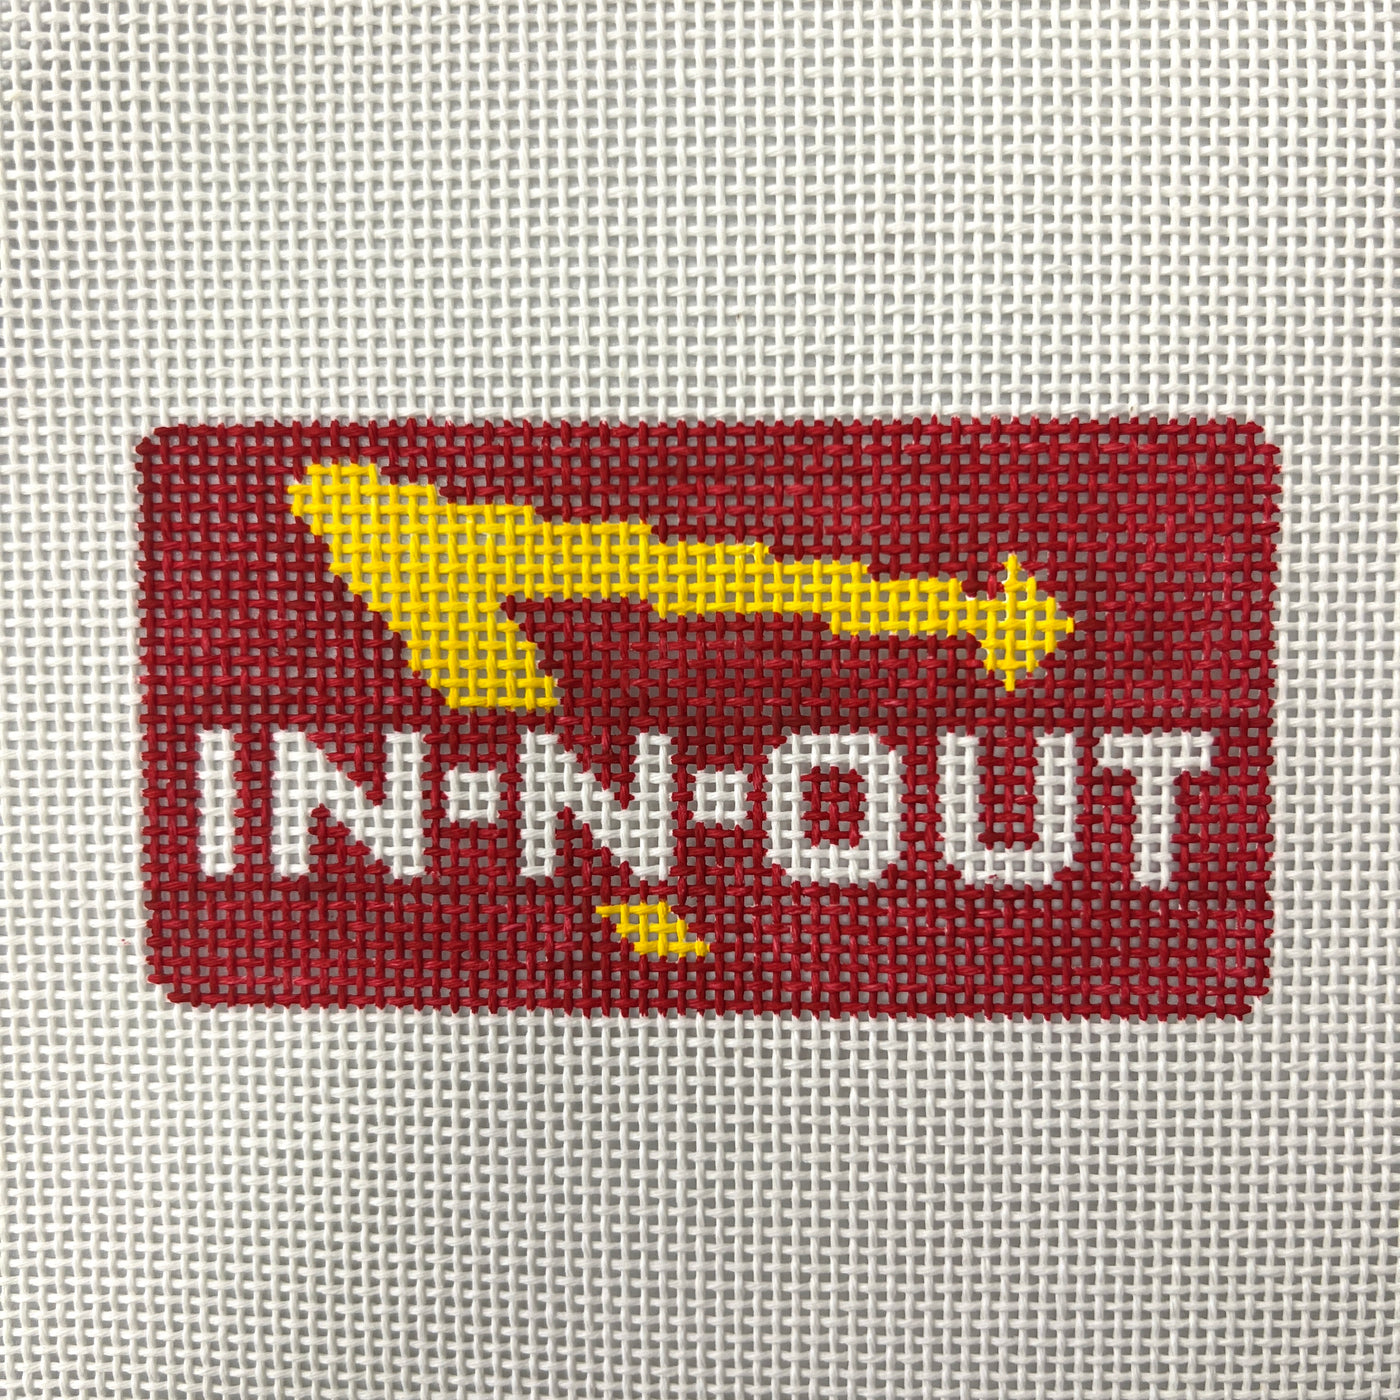 In-N-Out Sign Ornament Needlepoint Canvas